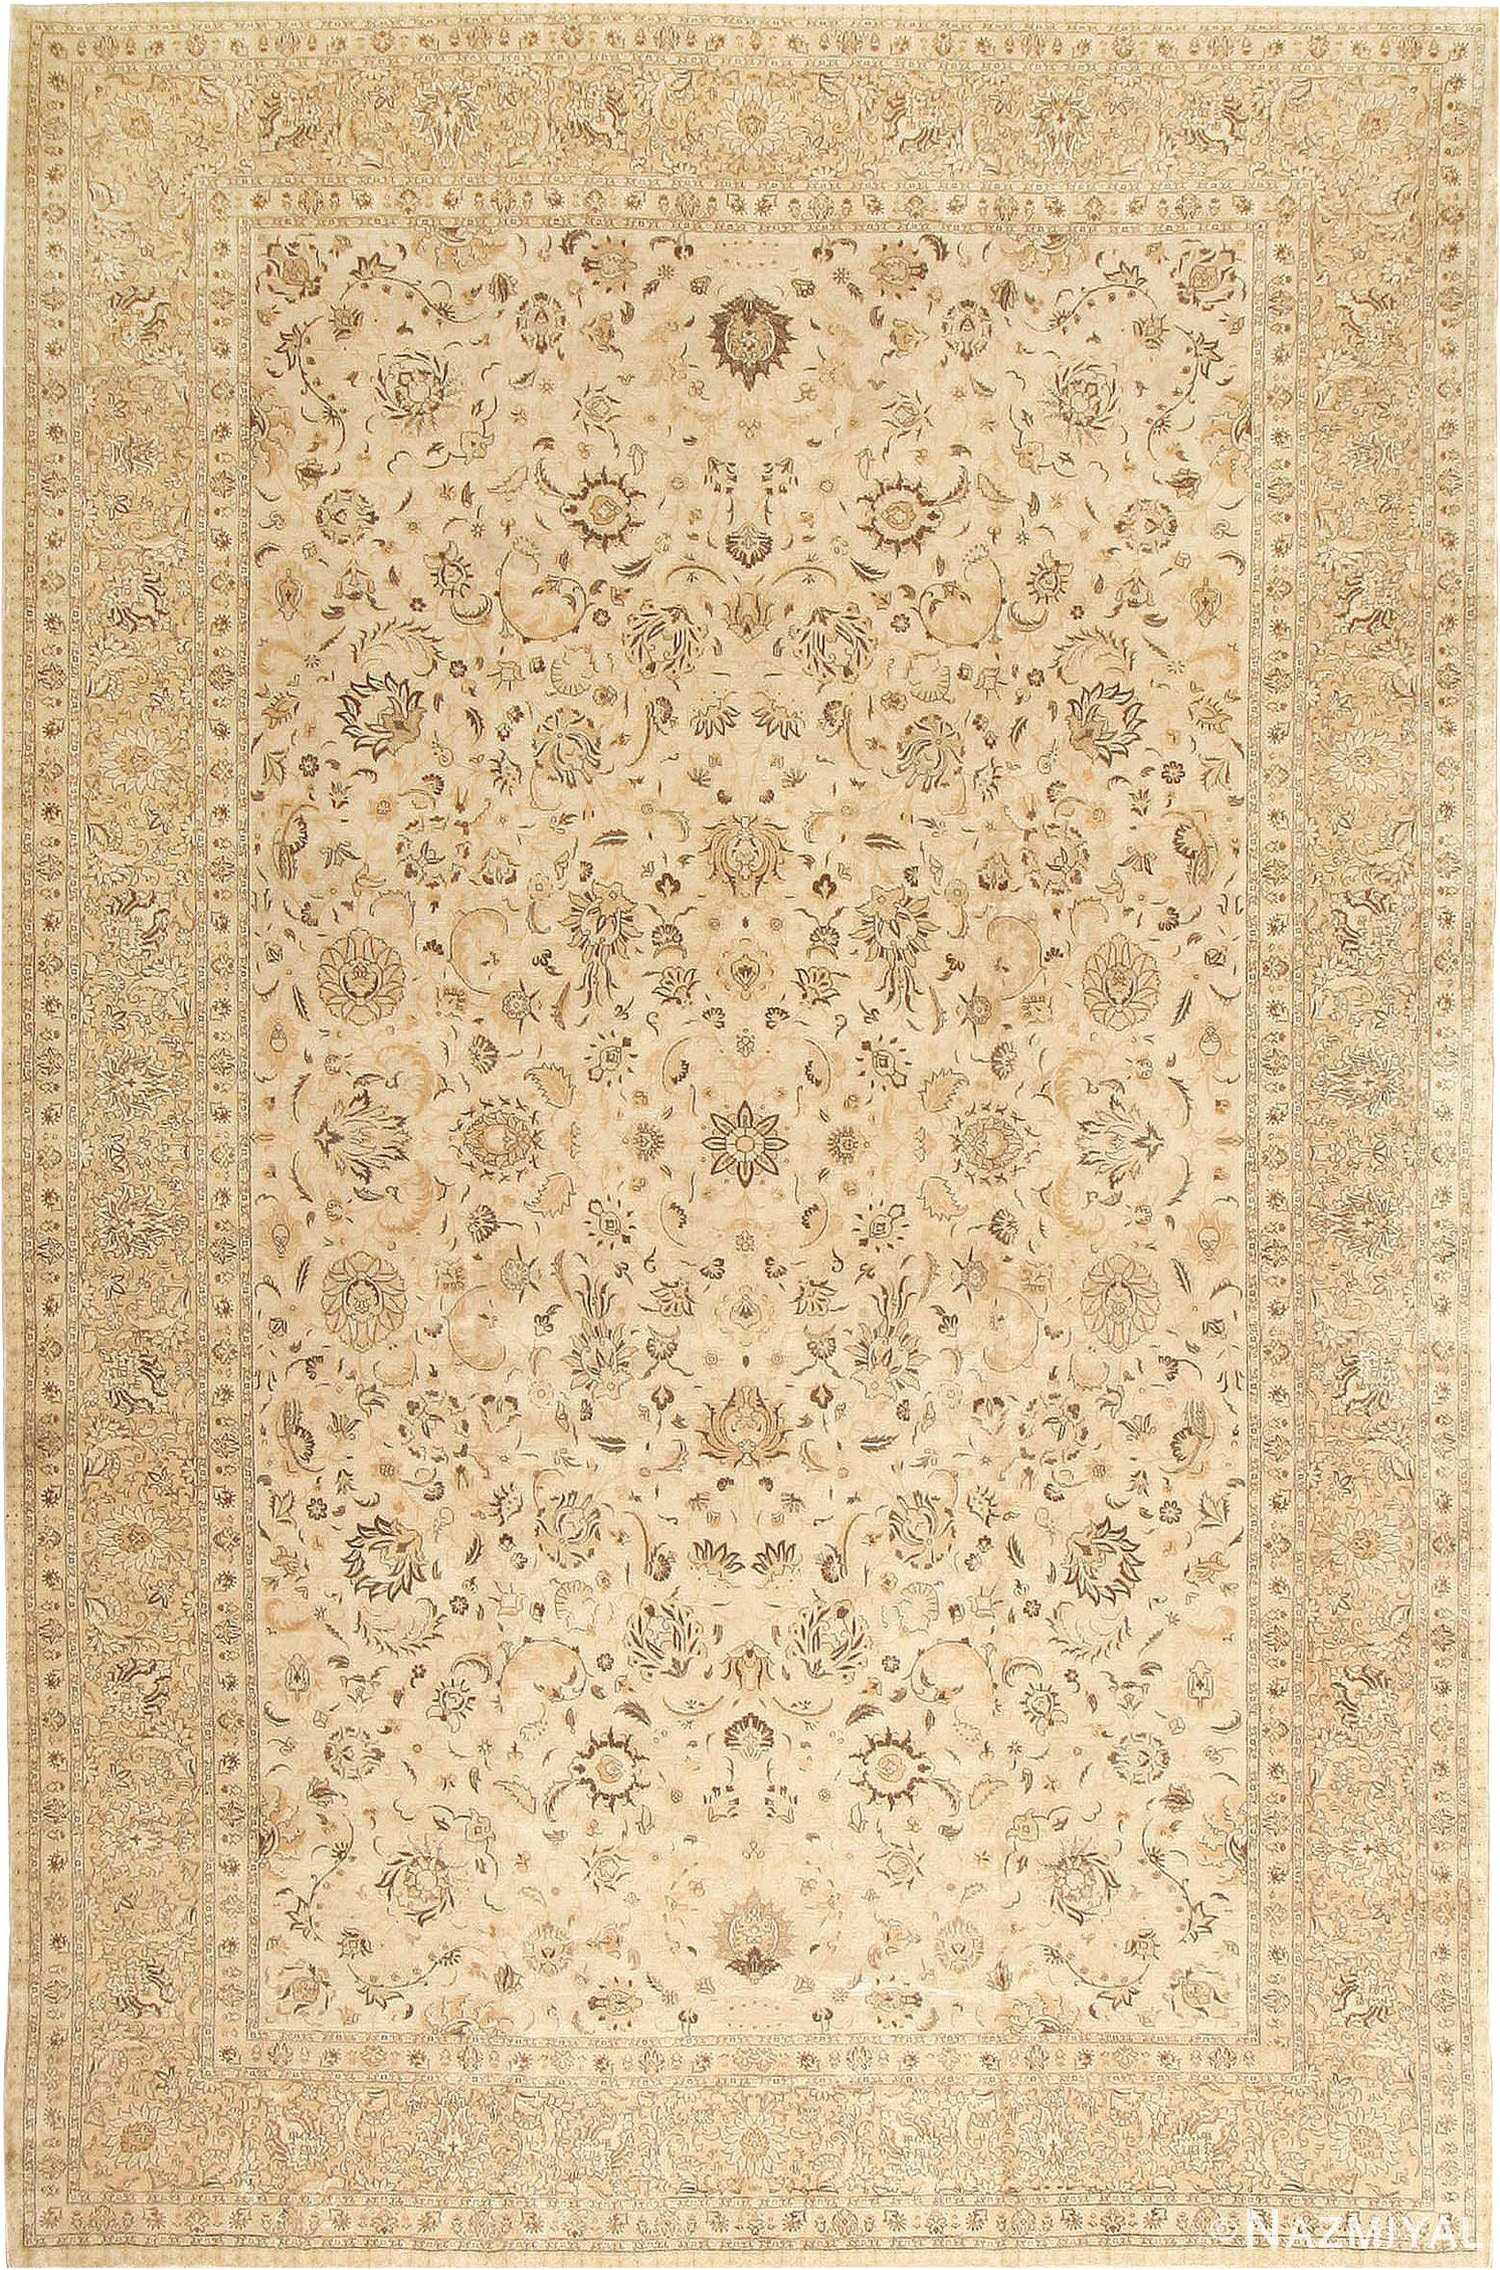 Large Soft Neutral Antique Persian Tabriz Area Rug #41516 by Nazmiyal Antique Rugs